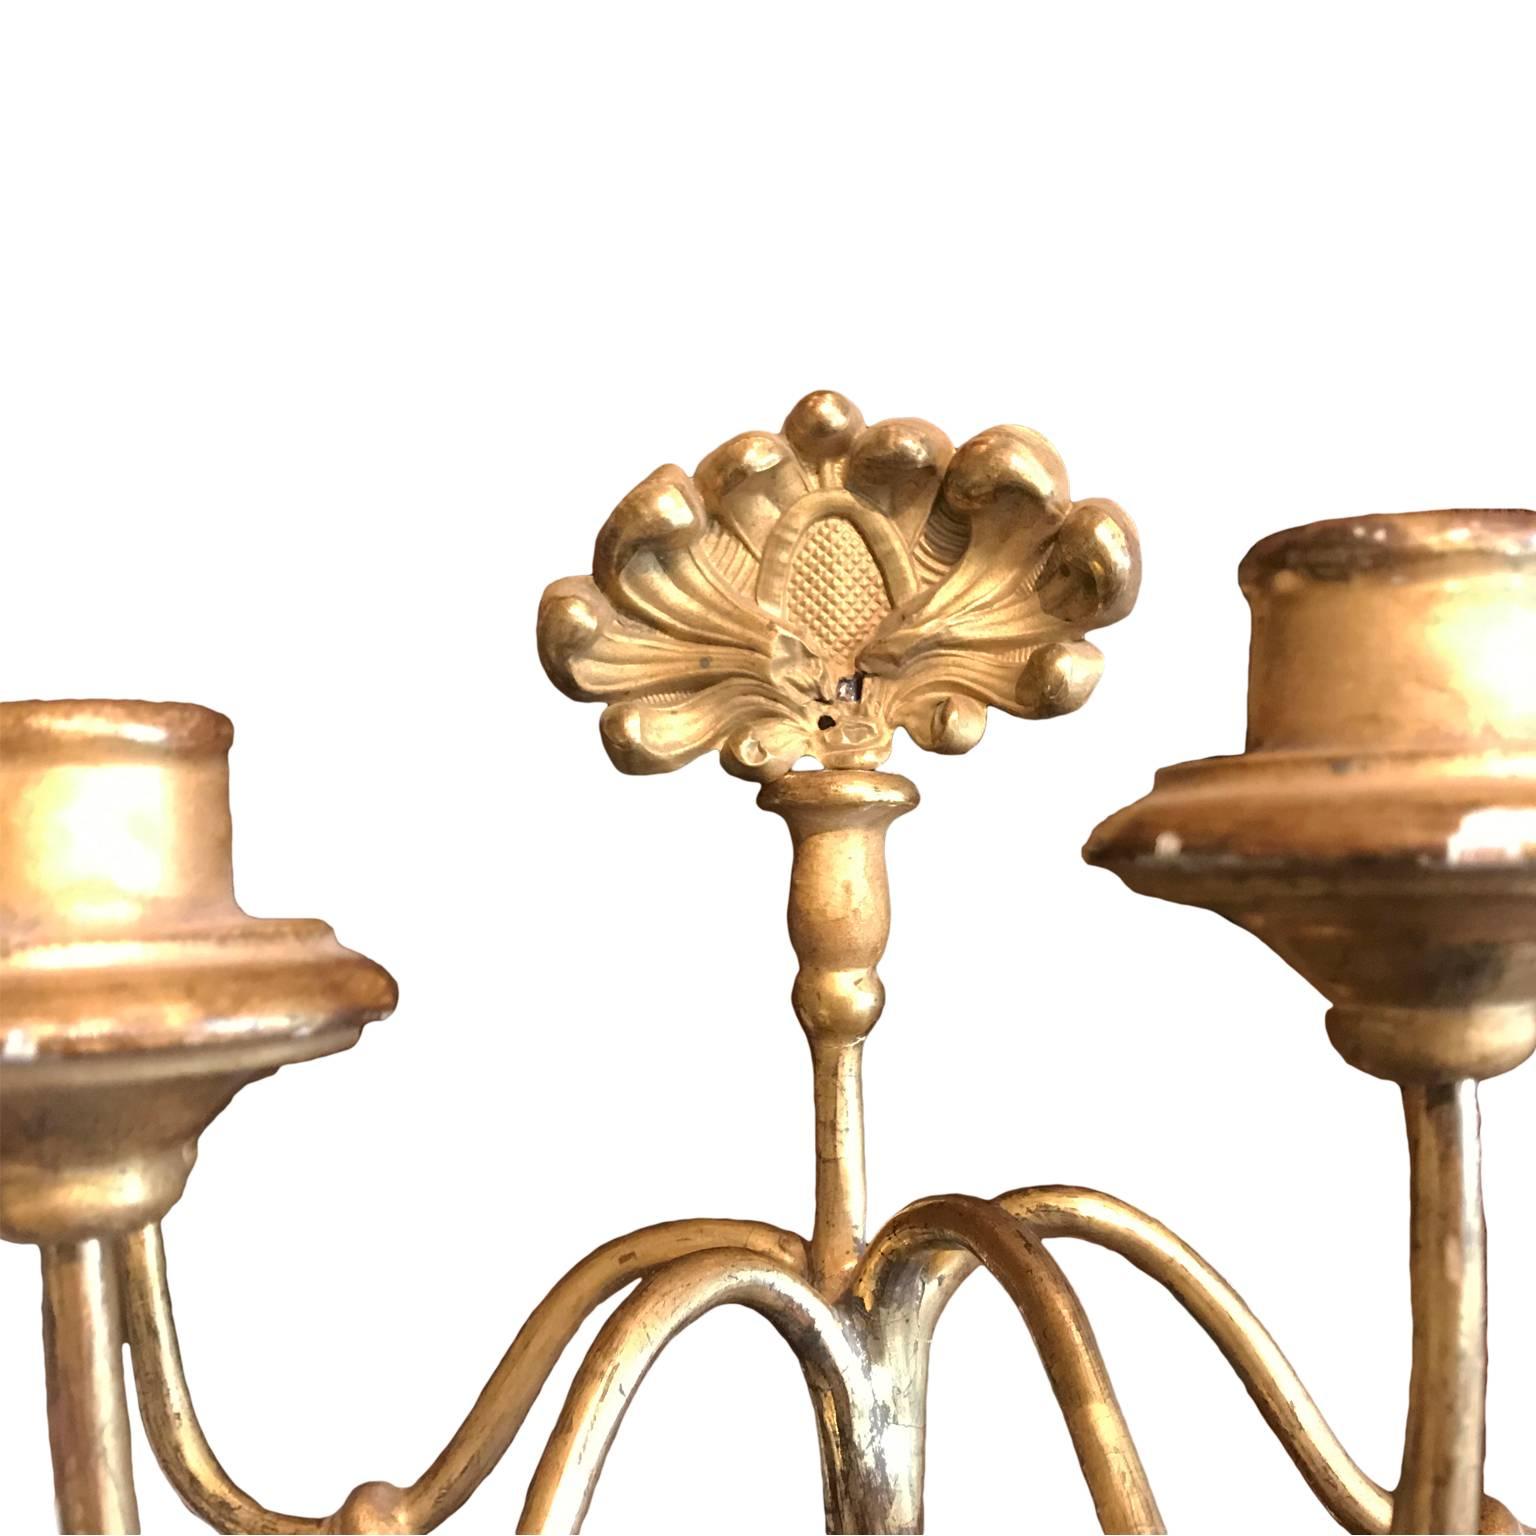 Carved Pair of 19th Century Italian Gilded Iron Four-Arm Candelabra Sconces